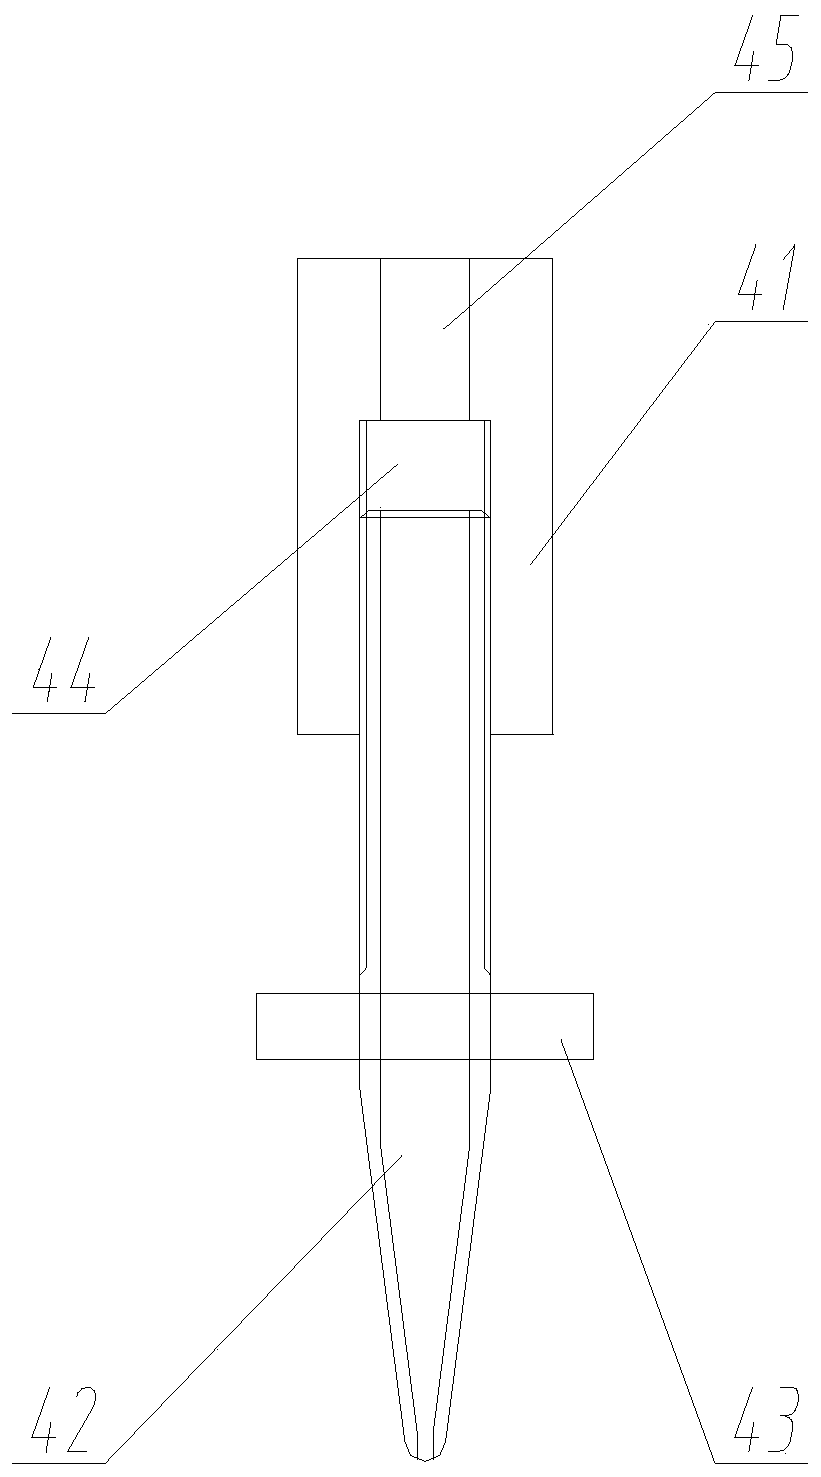 Dispensing device for instrument